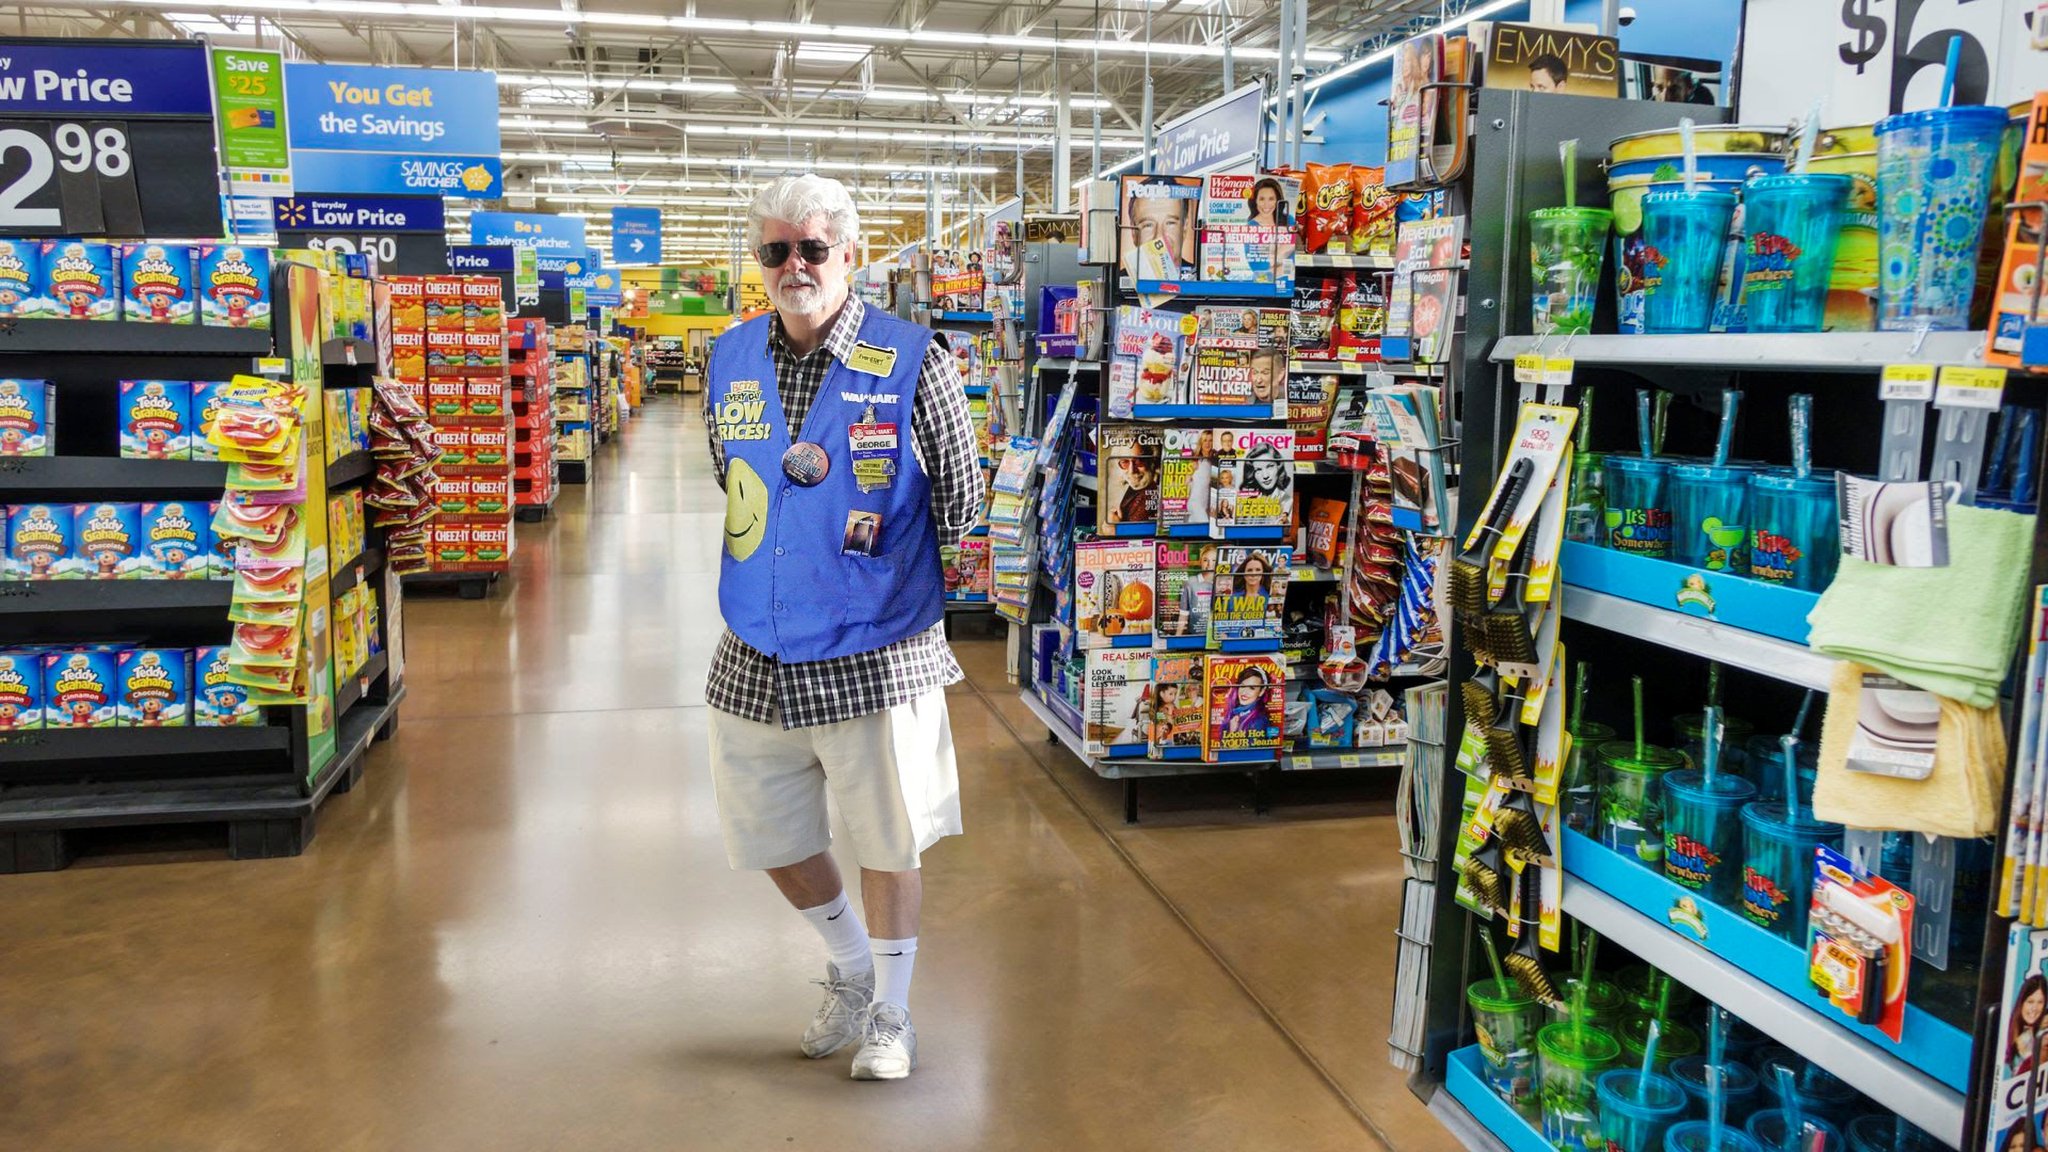 George Lucas Spotted Working as Walmart Greeter - Faking Star Wars